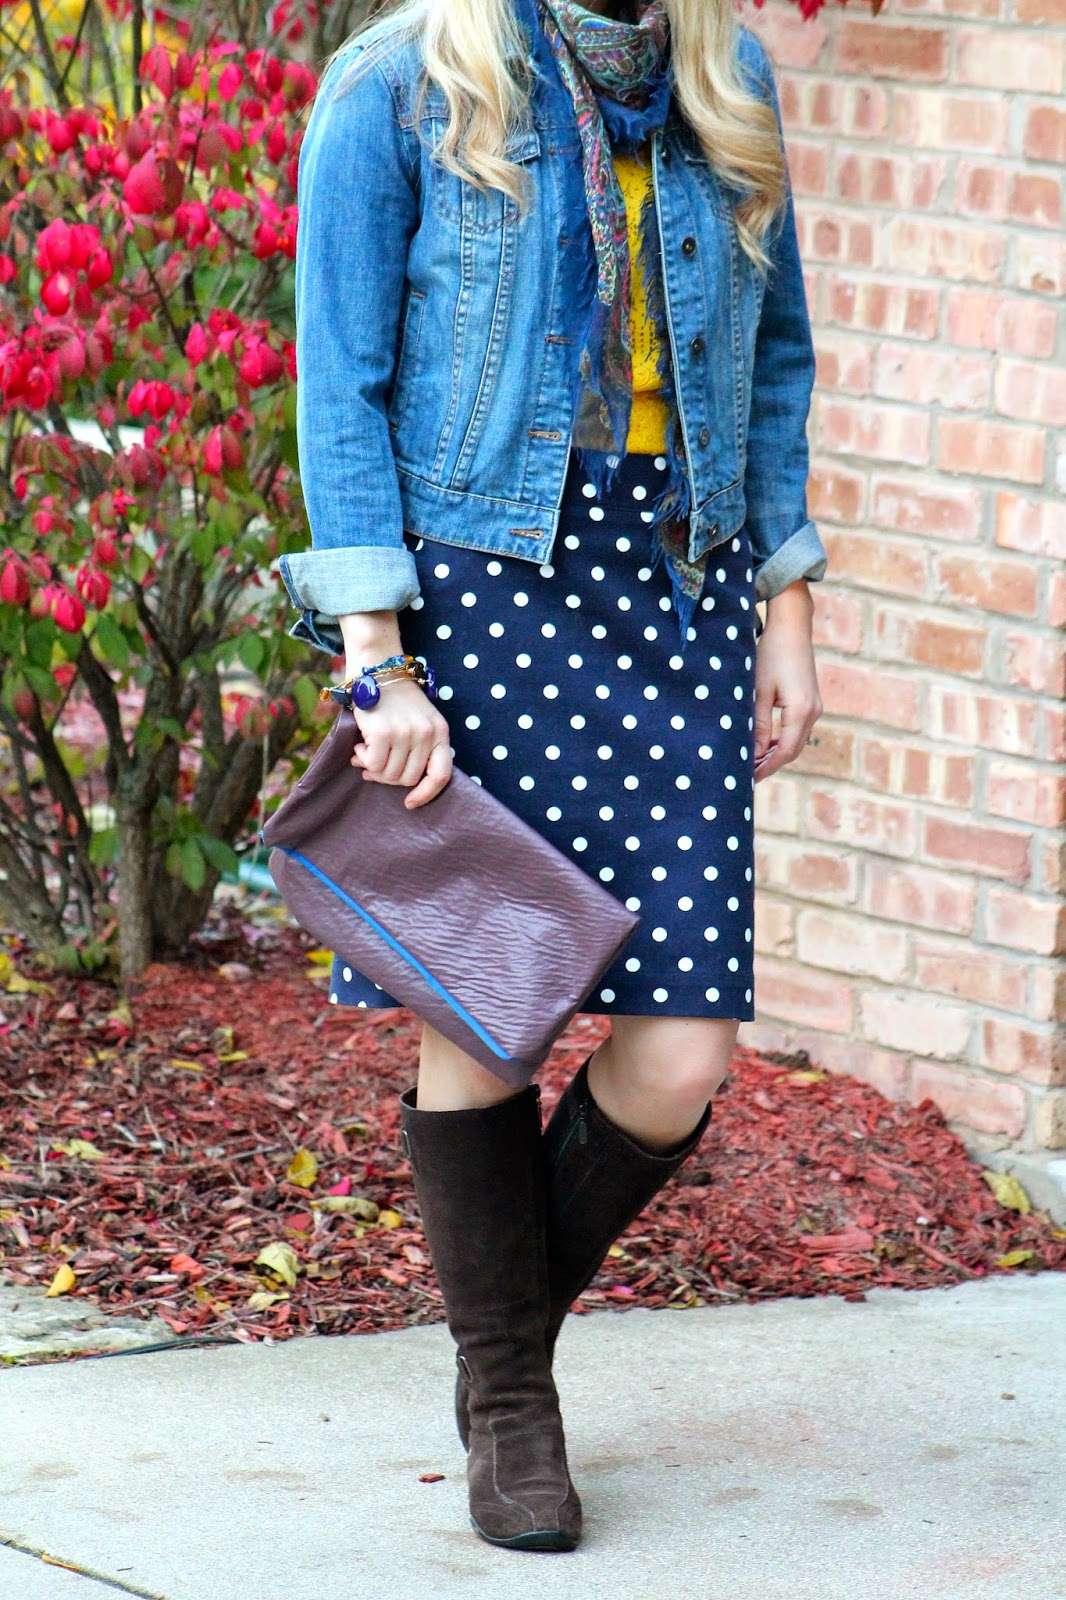 Printed Skirt Remix for Fall - I do deClaire